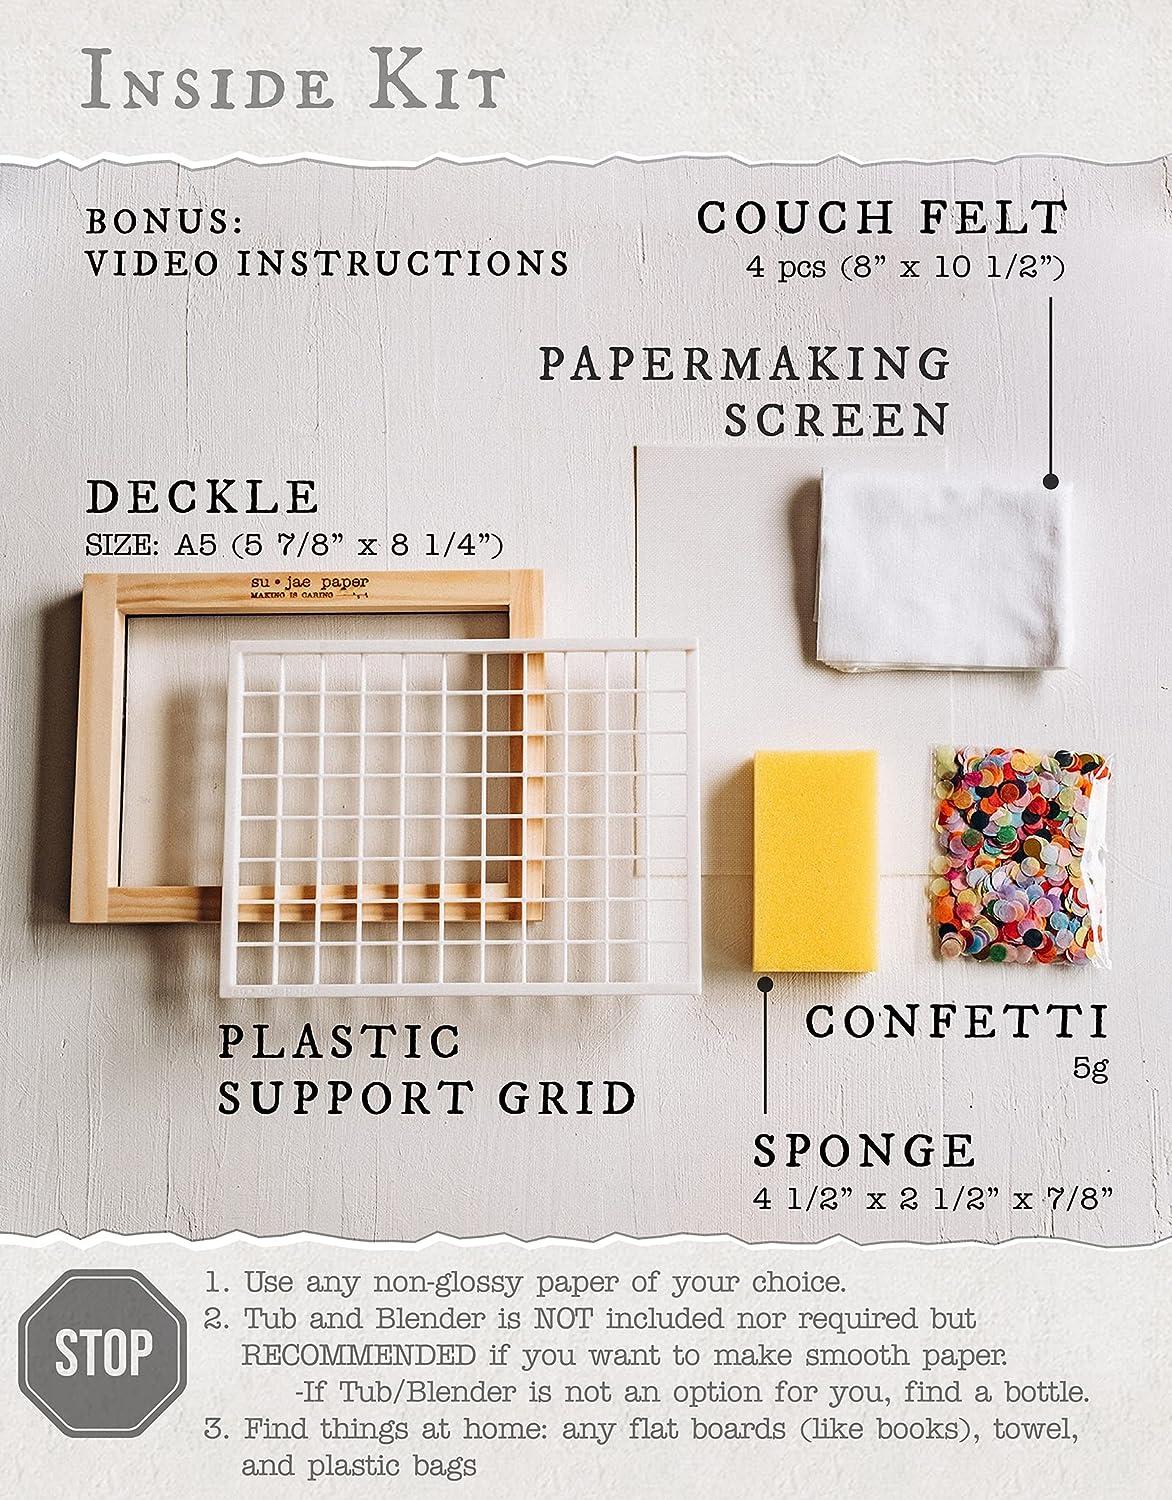 Waterproof Paper Making Screen Kit to Craft Your Own Handmade A5 Paper:  Wood Deckle Mesh Screen Plastic Grid Confetti Sponge 4 Couch Felts & Video  Instructions